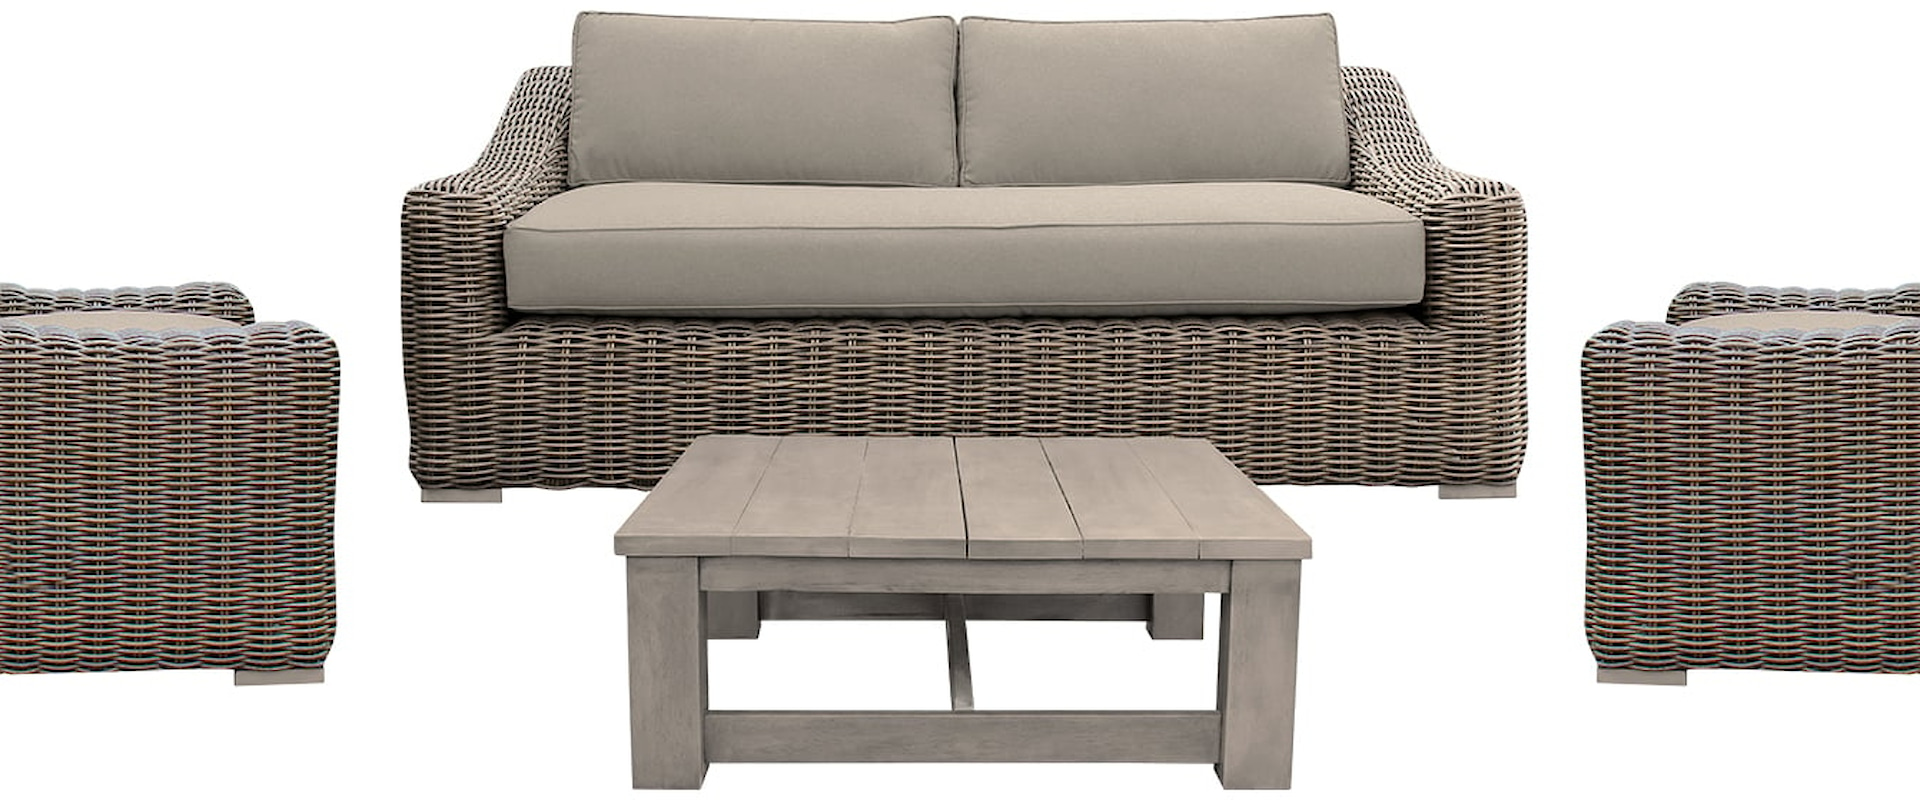 Verano 4 Piece Outdoor Patio Furniture Set in Wicker and Acacia Wood with Taupe Cushions